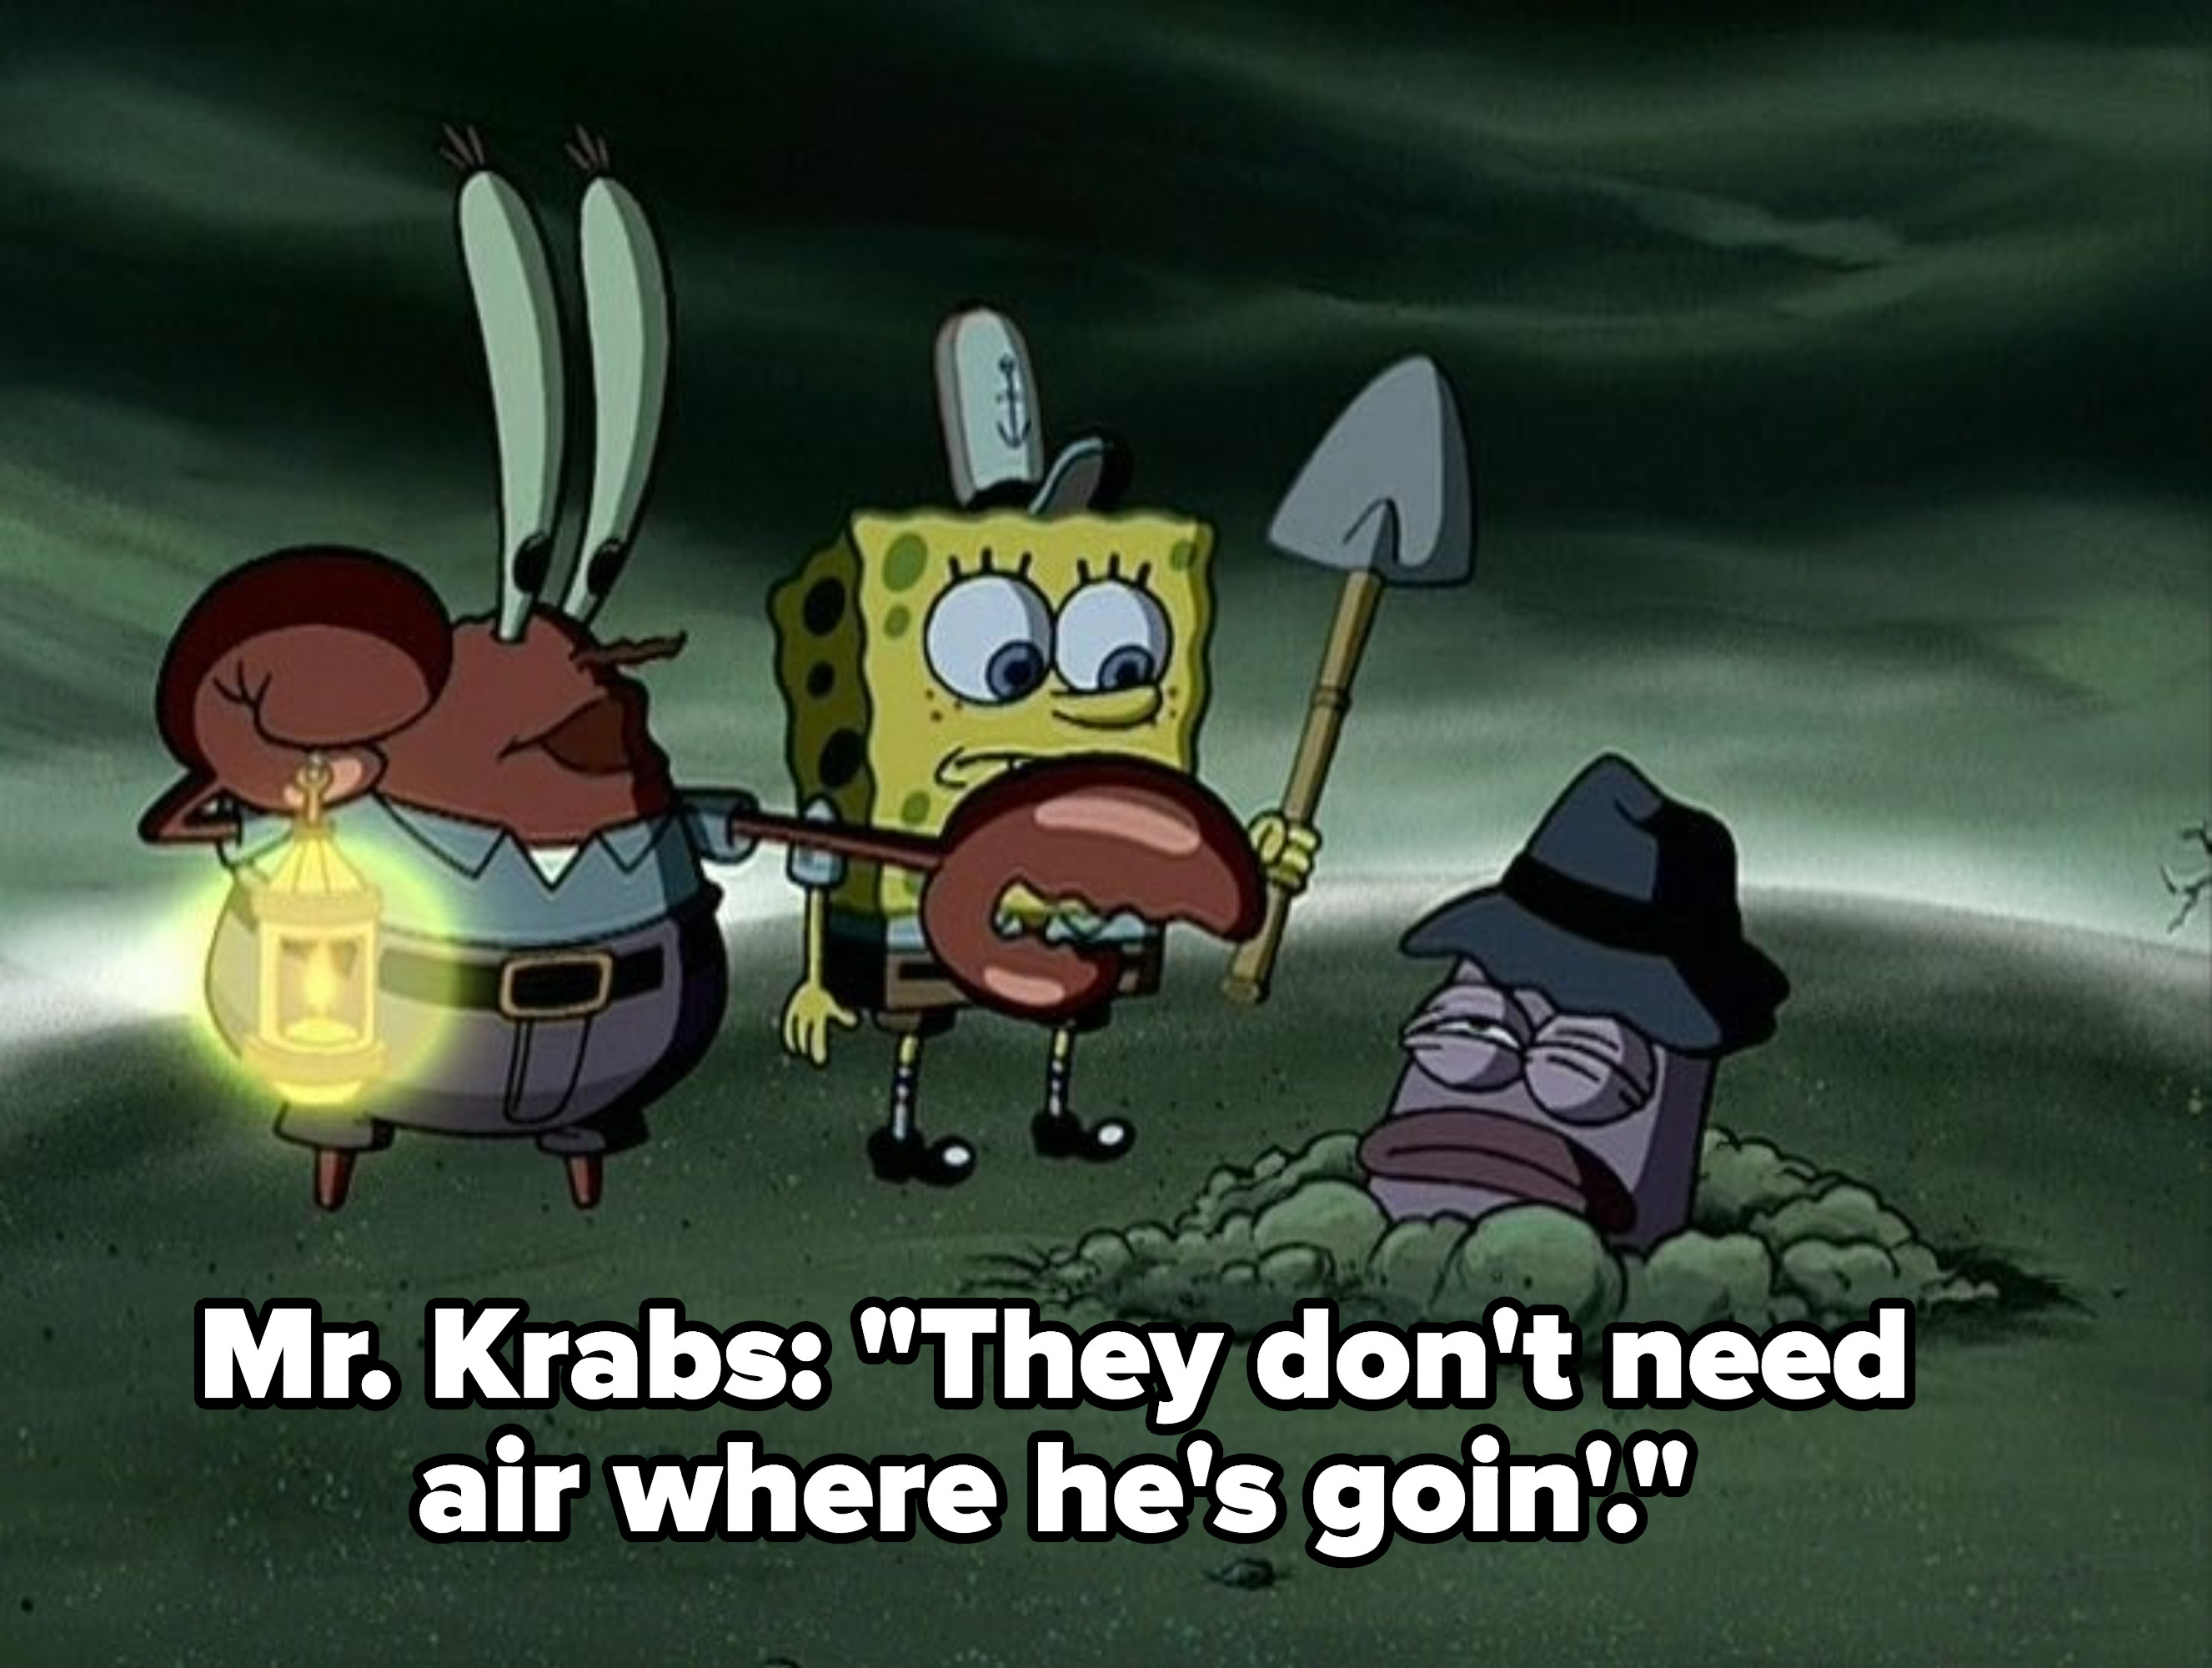 Mr. Krabs: &quot;They don&#x27;t need air where he&#x27;s goin&#x27;&quot;